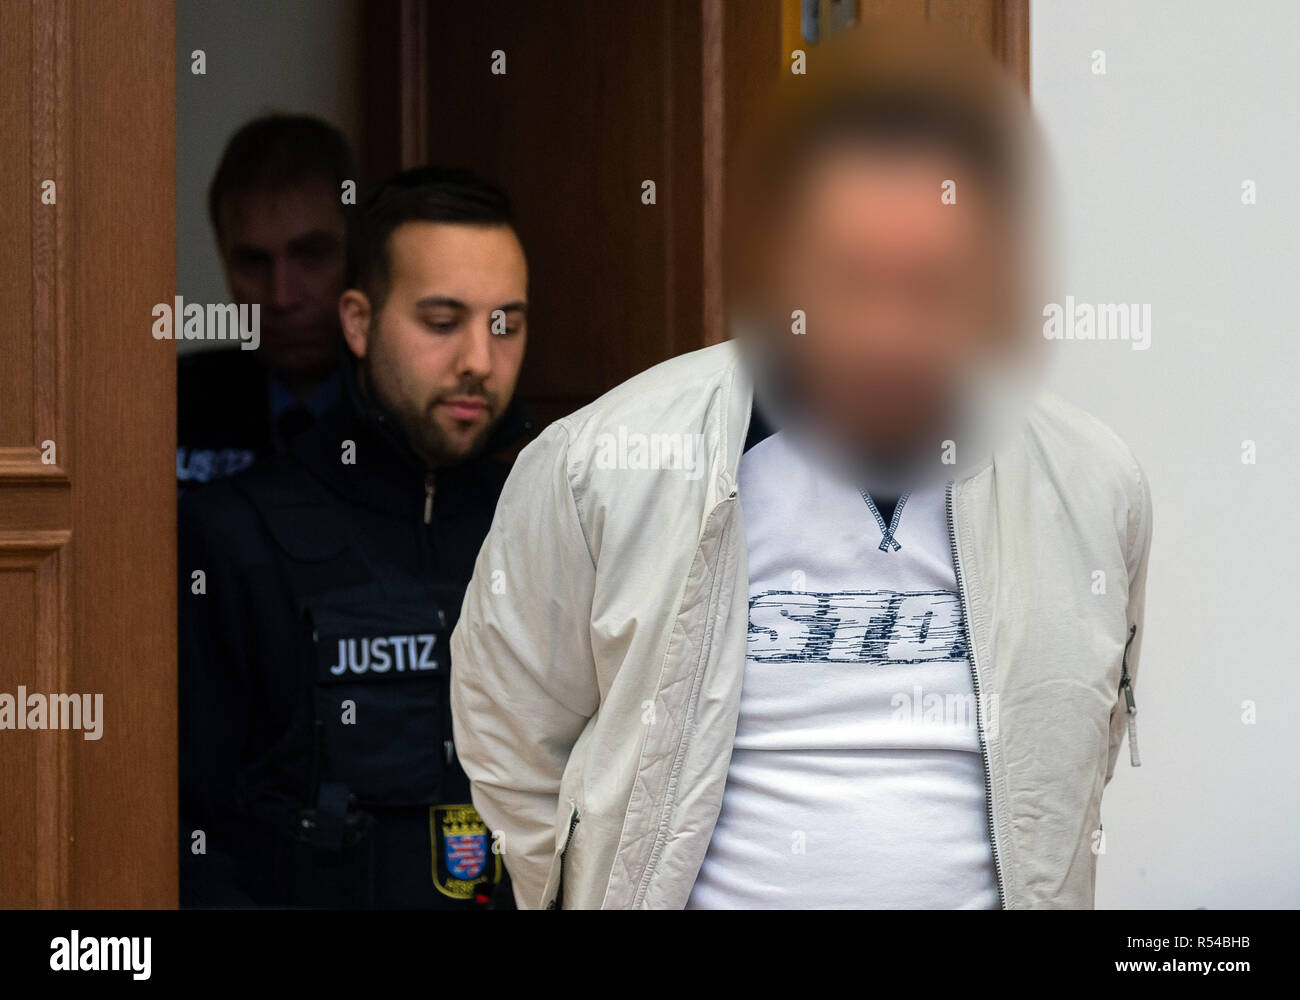 27 November 2018, Hessen, Gießen: The 48-year-old defendant (r) is taken to the courtroom of the Regional Court by judicial officers before the trial begins. About three years ago, the son of the billionaire Würth was kidnapped. Together with accomplices, the accused is said to have kidnapped the handicapped son of the Baden-Württemberg entrepreneur Reinhold Würth in June 2015 in Schlitz, East Hesse, and demanded a ransom of three million euros. After a failed handover the victim was found one day later in a forest near Würzburg, unharmed and chained to a tree. Photo: Silas Stein/dpa - ATTENT Stock Photo